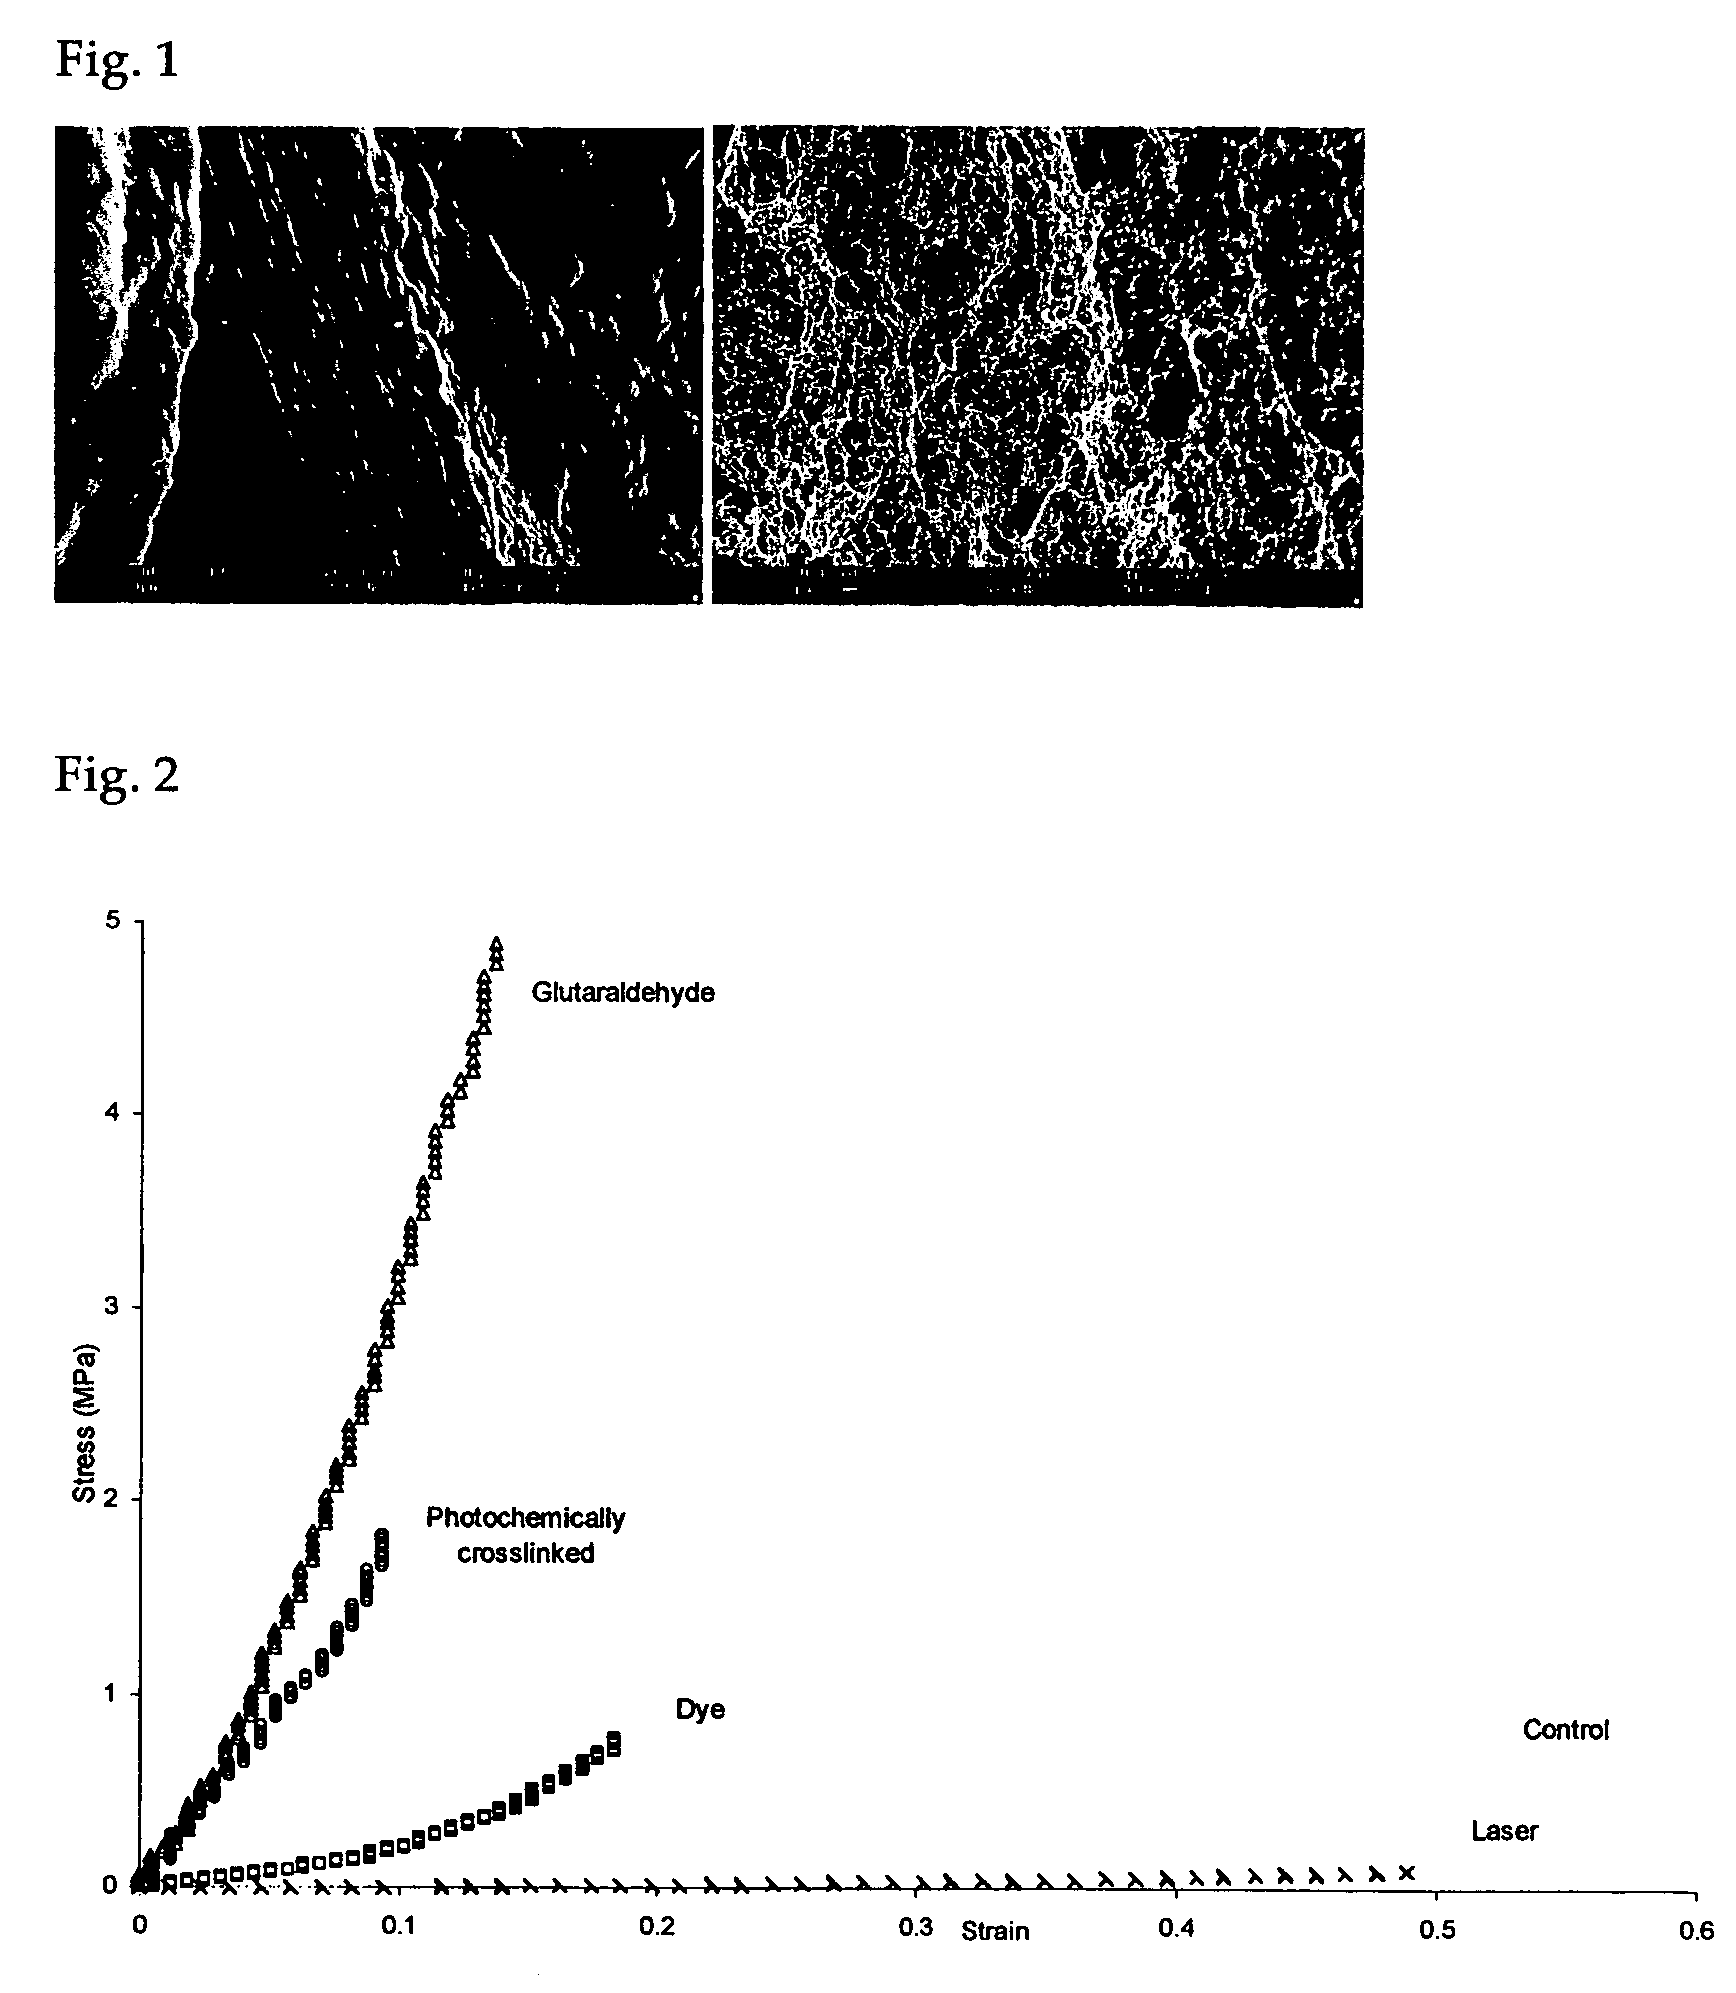 Photochemically crosslinked collagen scaffolds and methods for their preparation